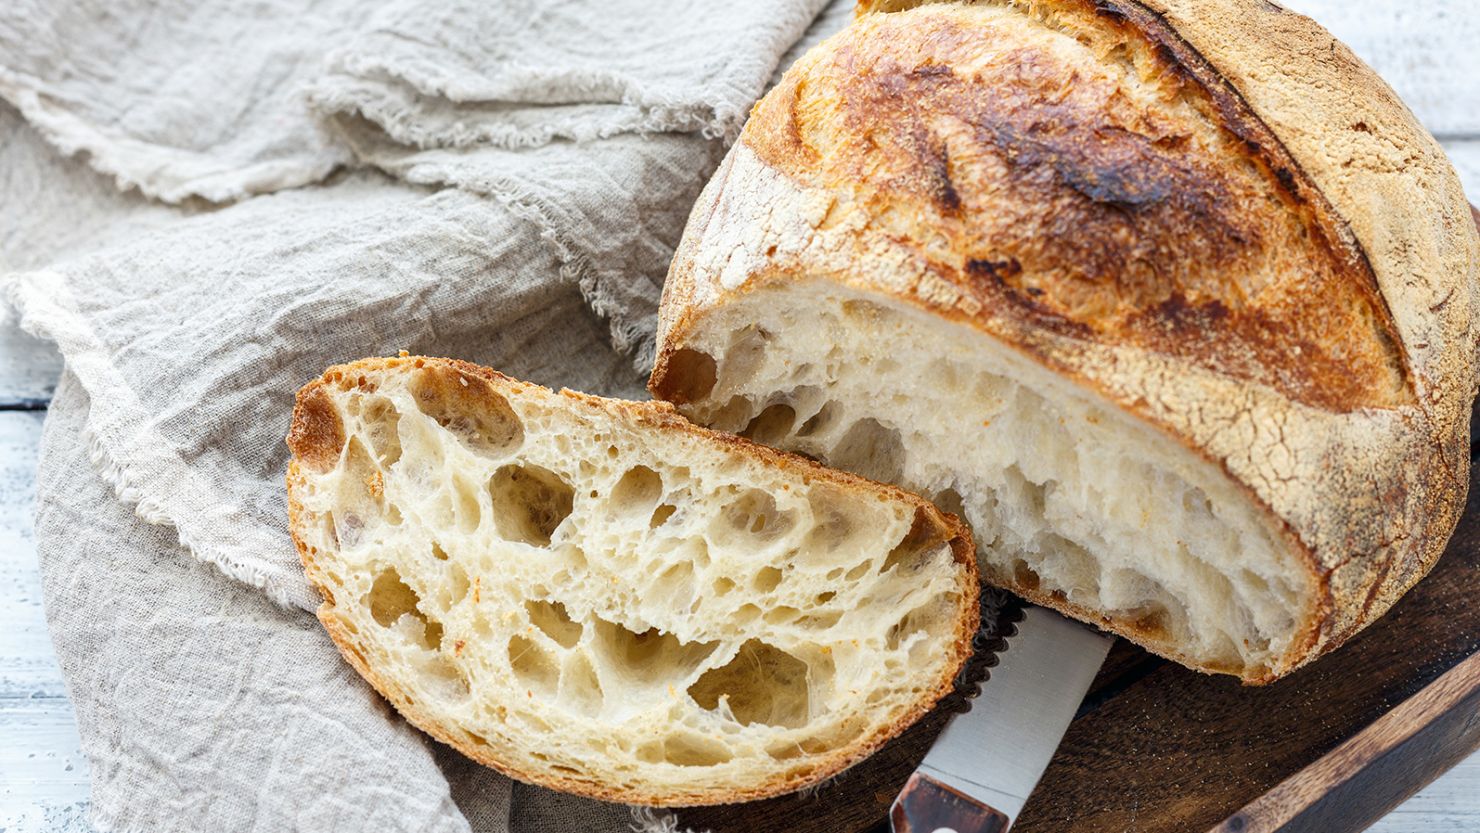 Bread isn't off-limits, dietitians say. In fact, it can be part of a healthy diet.